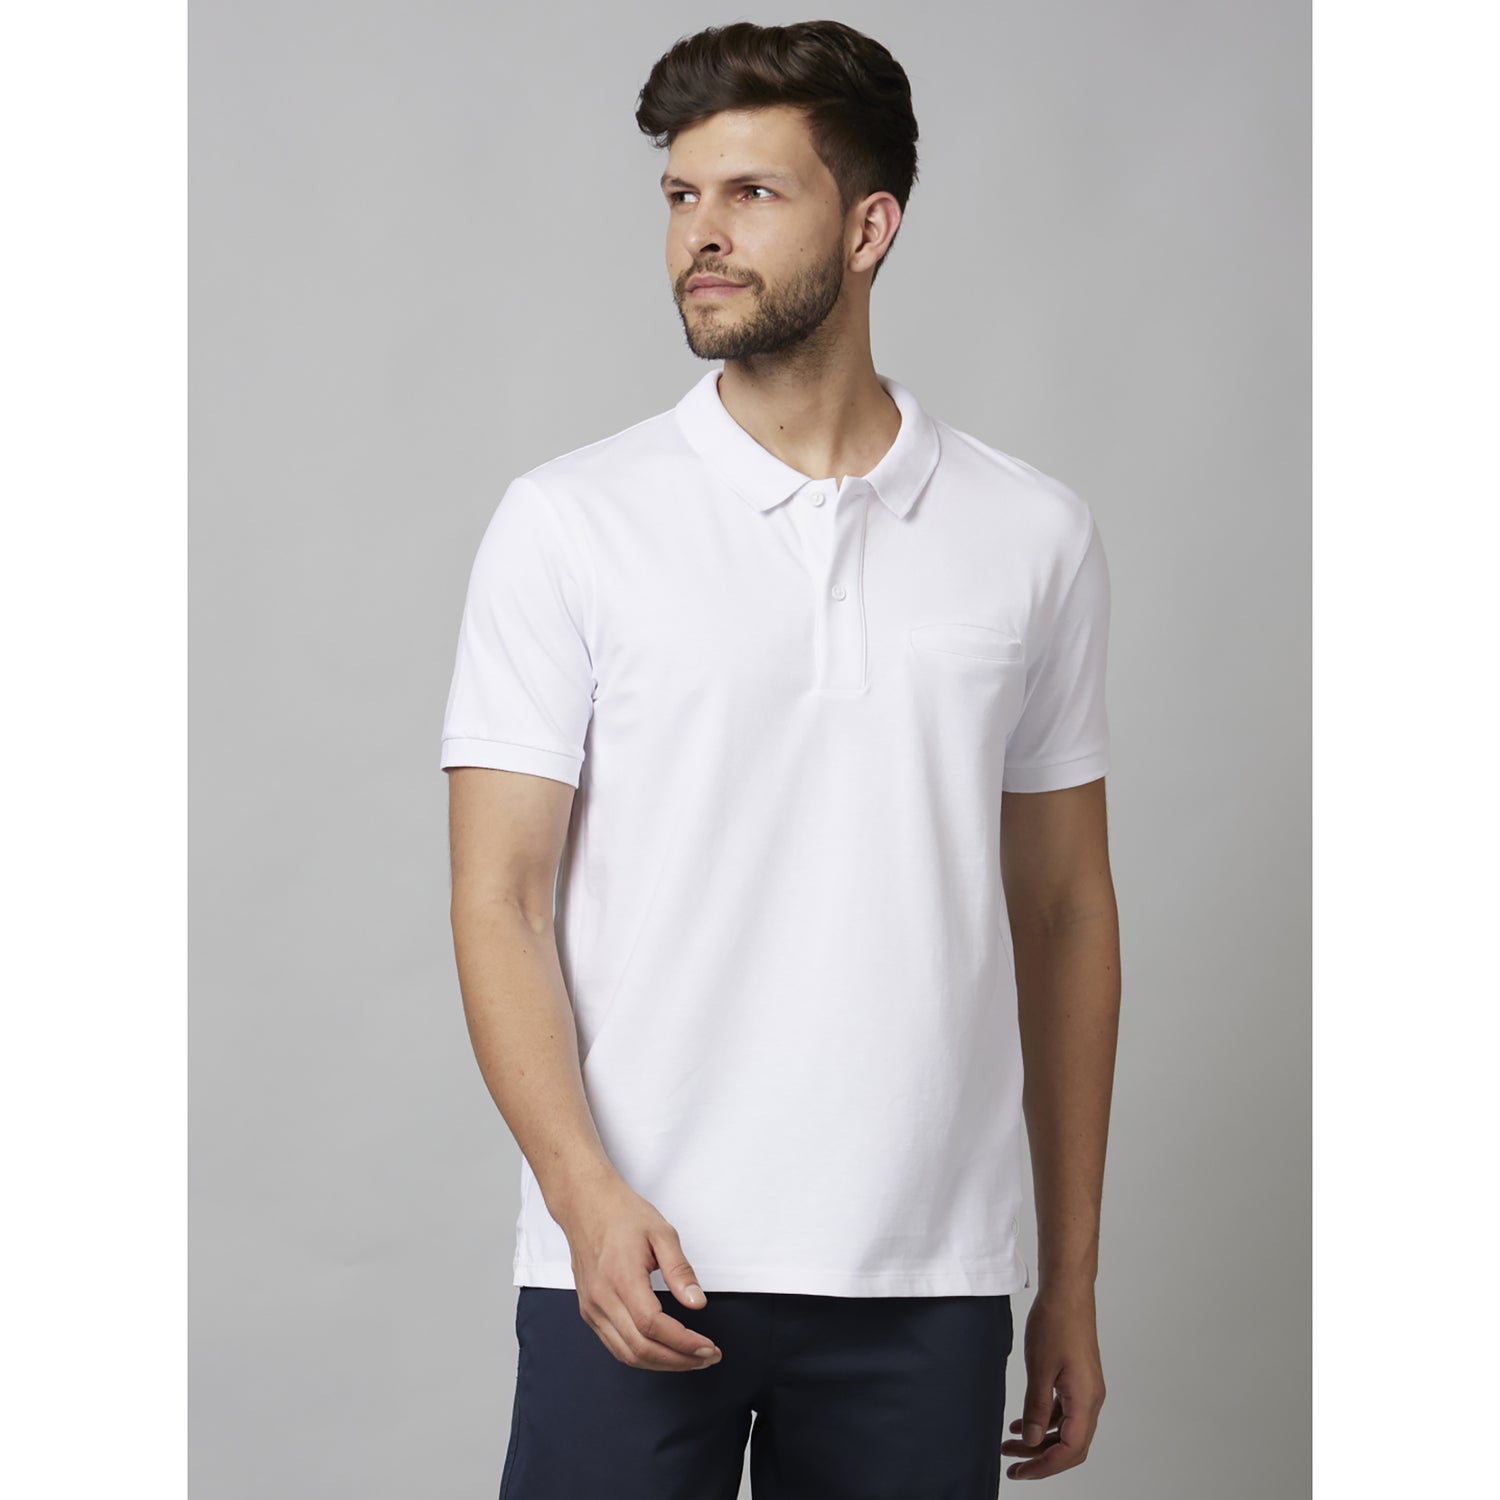 White Solid Short Sleeve Cotton Poly Blend T-Shirts (DECOULE)